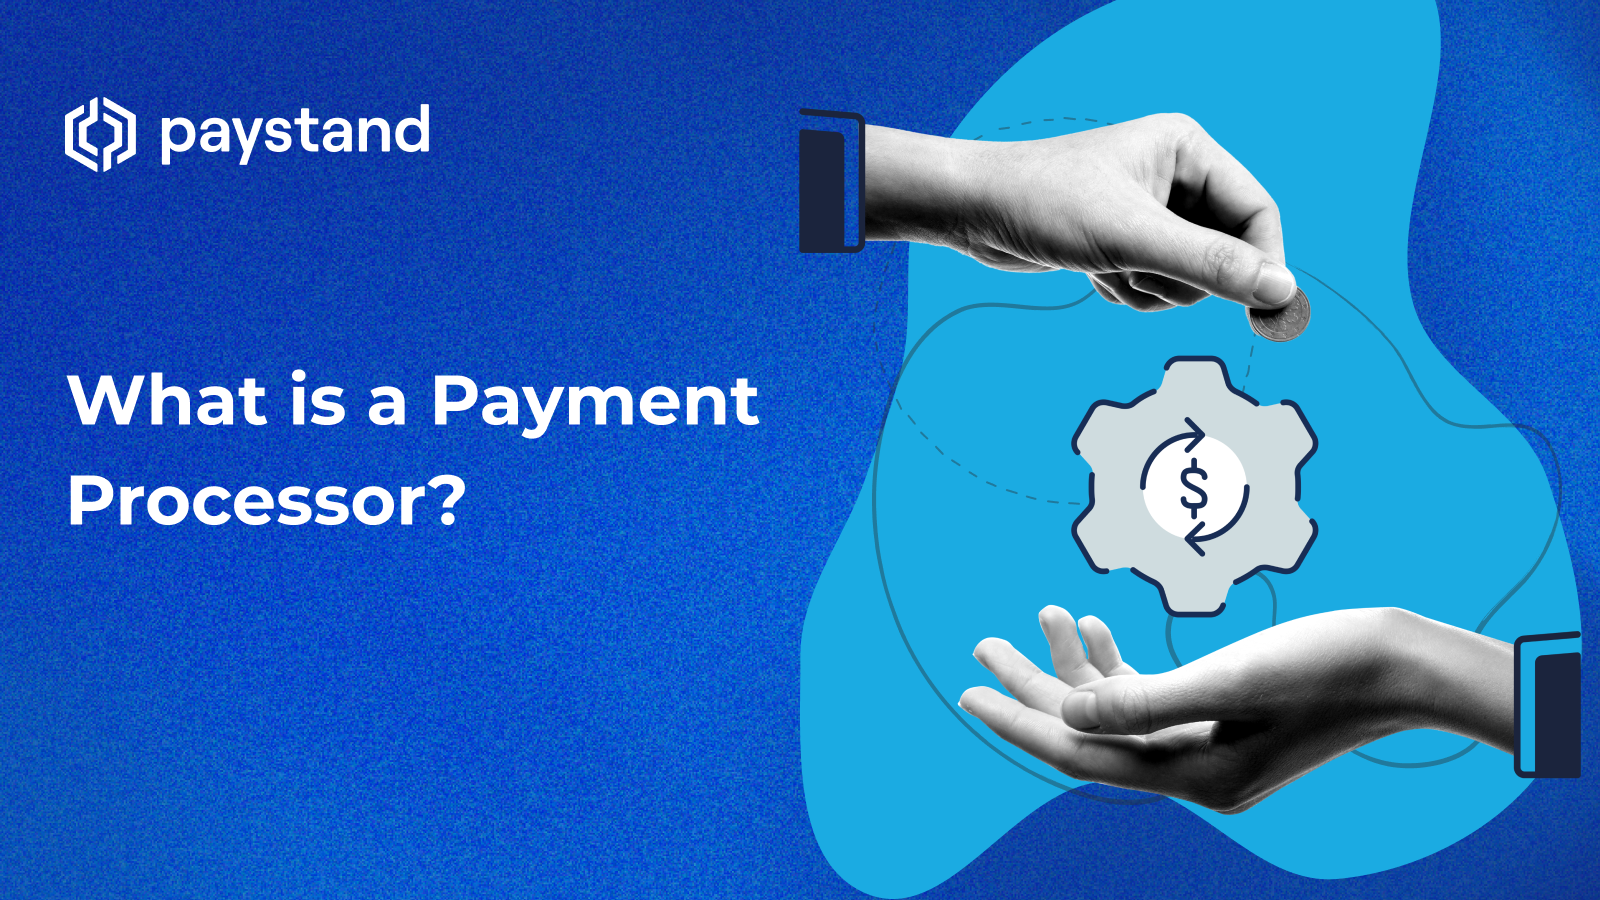 What is a Payment Processor?